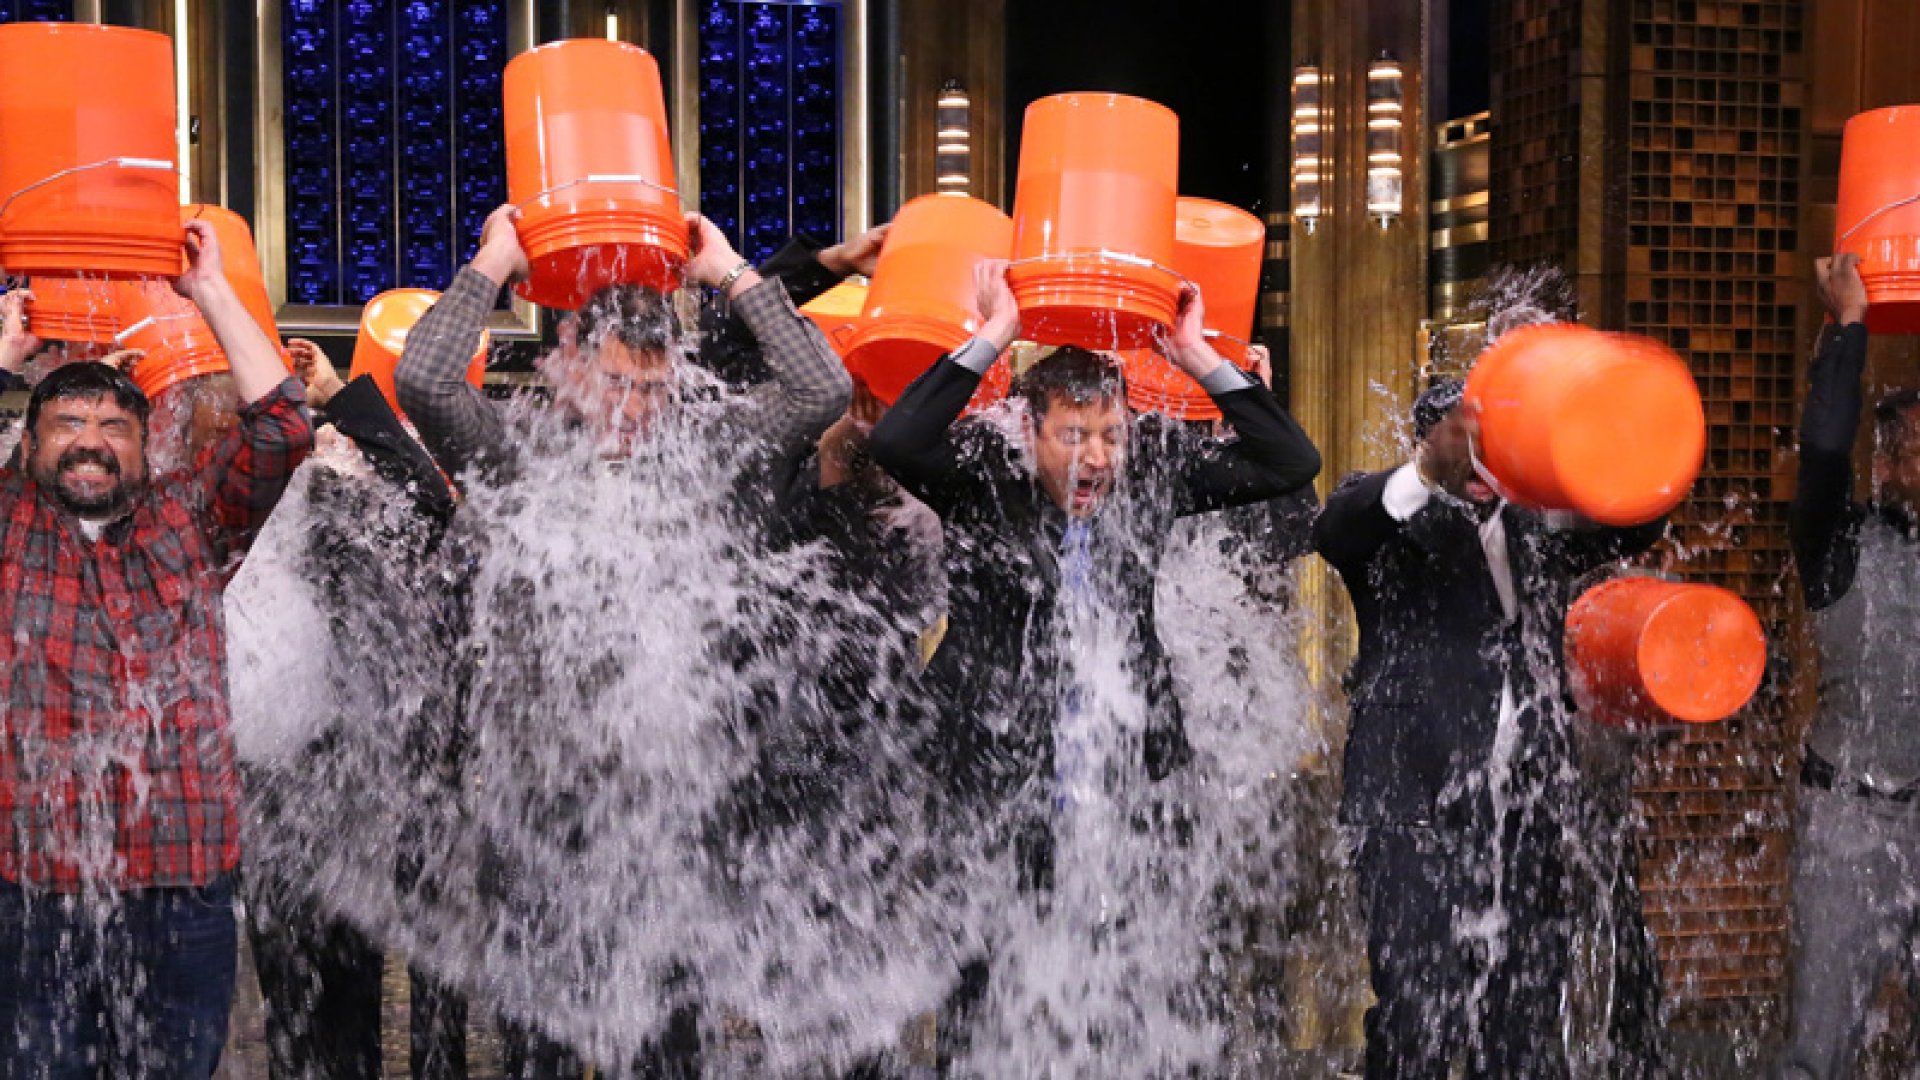 Jimmy Fallon and his guests take the ALS Ice Bucket Challenge during the Tonight Show